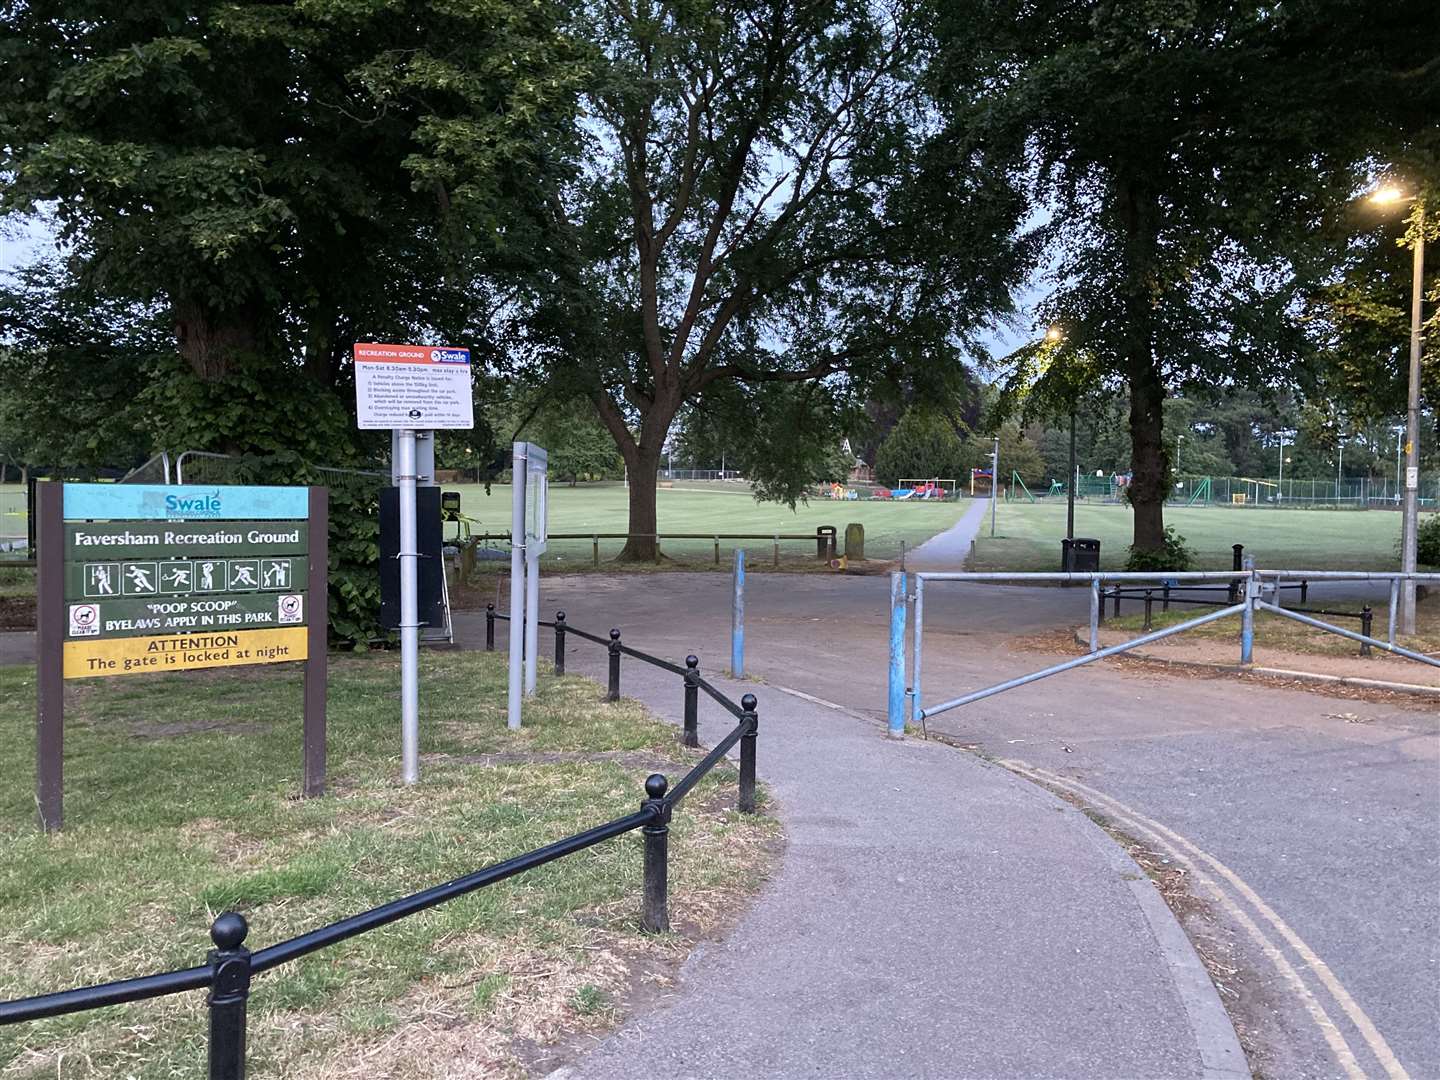 A gang threatened a group of friends at Faversham Recreation Ground last Wednesday night